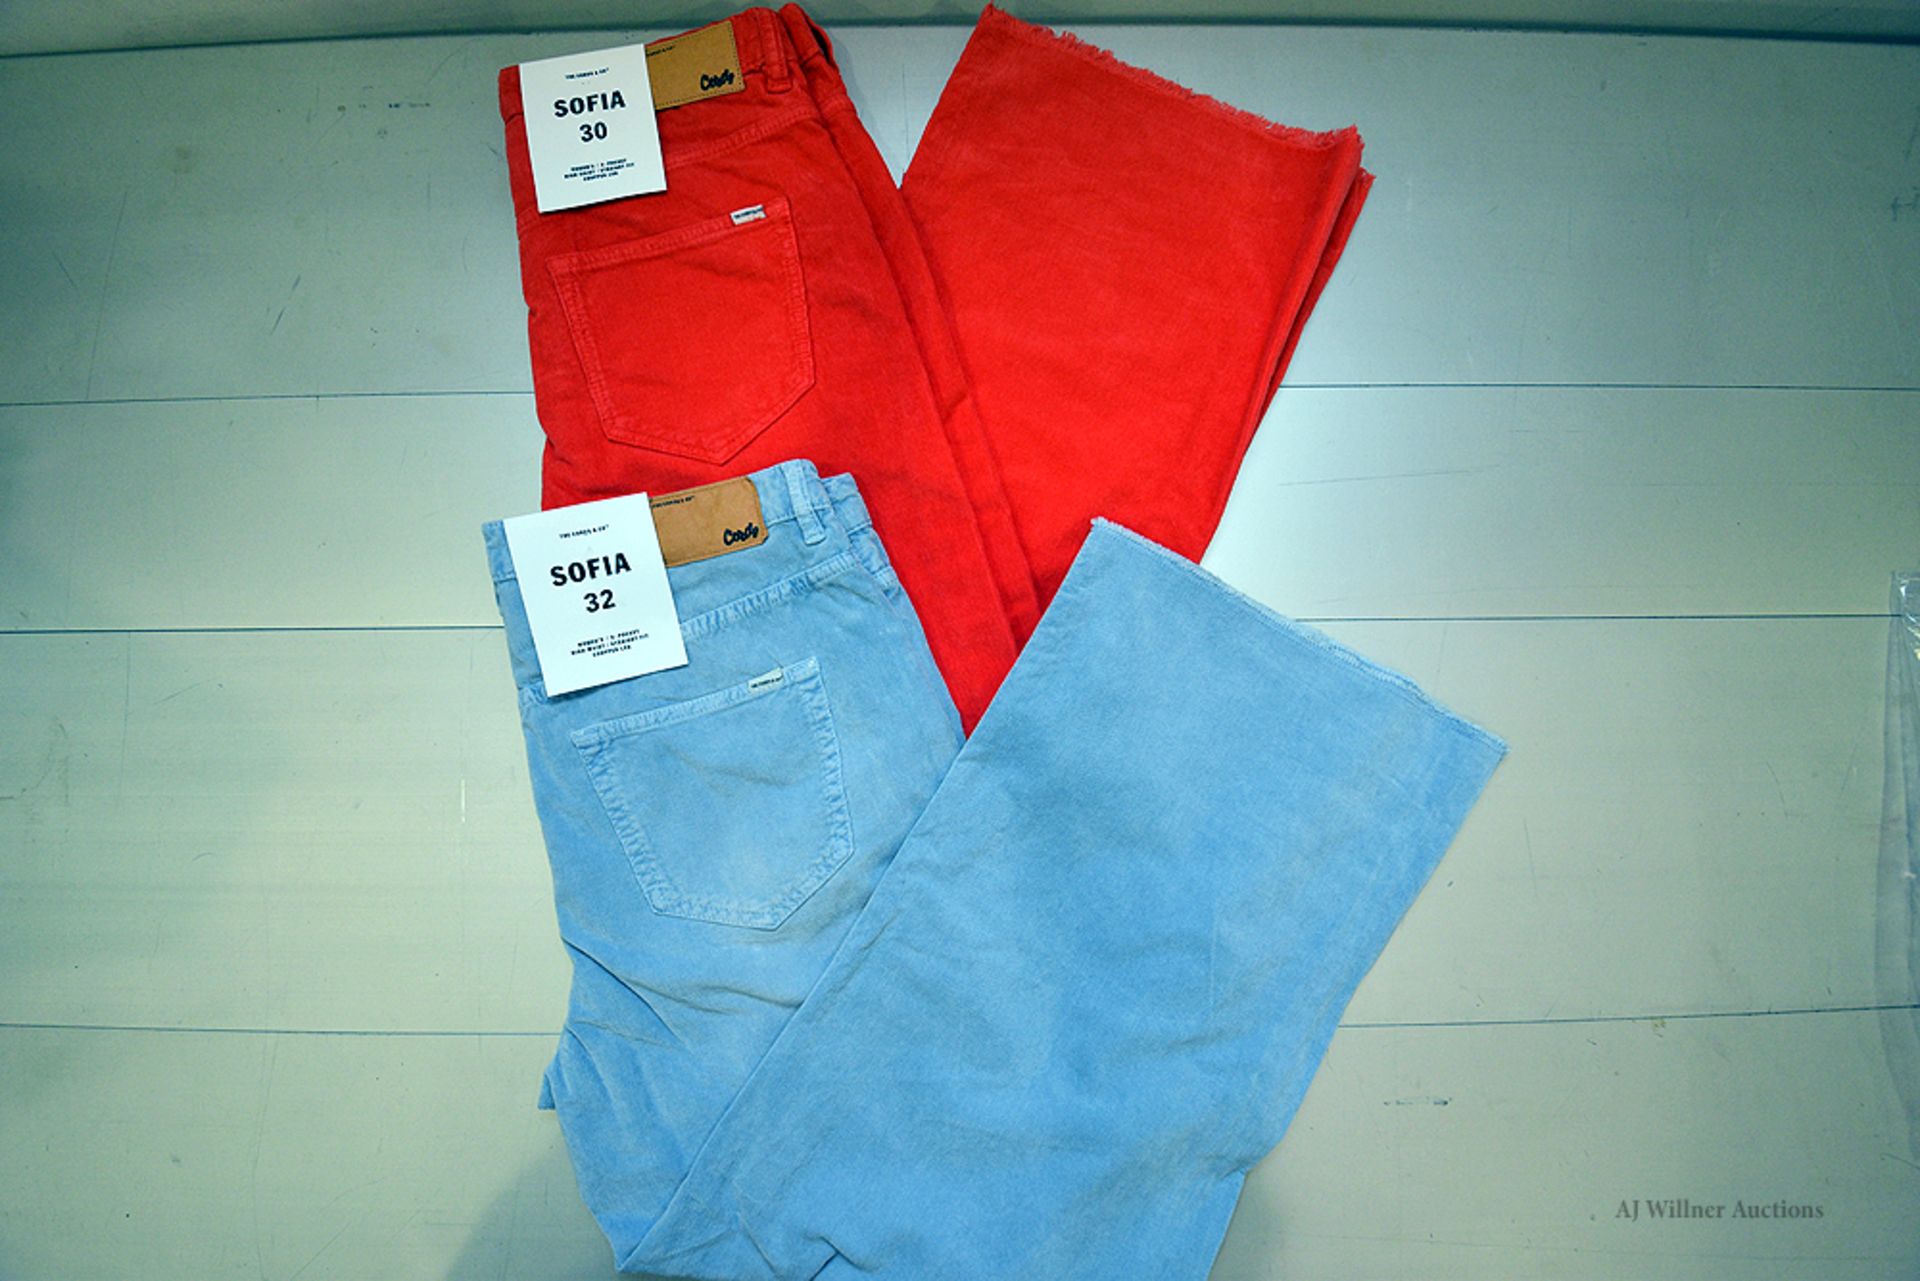 The Cords & Co. "Sofia" Style,Womens/High-Waist/Straight Fit/Cropped Leg Pants. Poppy Red&Denim Blue